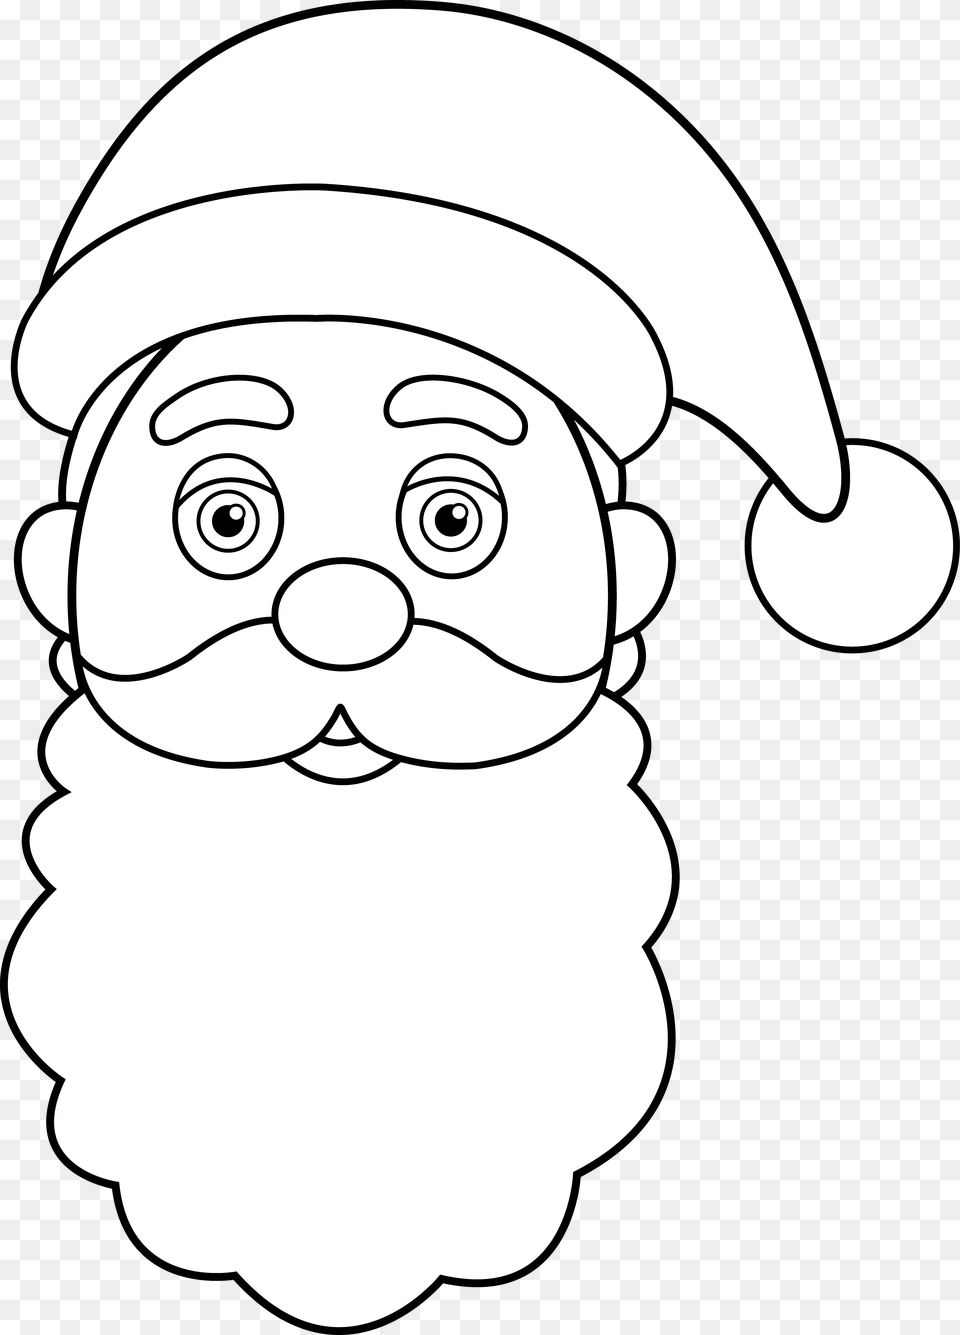 Whitefaceline Artheadcartoonblack And Whitefictional Santa Claus Face, Art, Drawing, Baby, Person Free Transparent Png